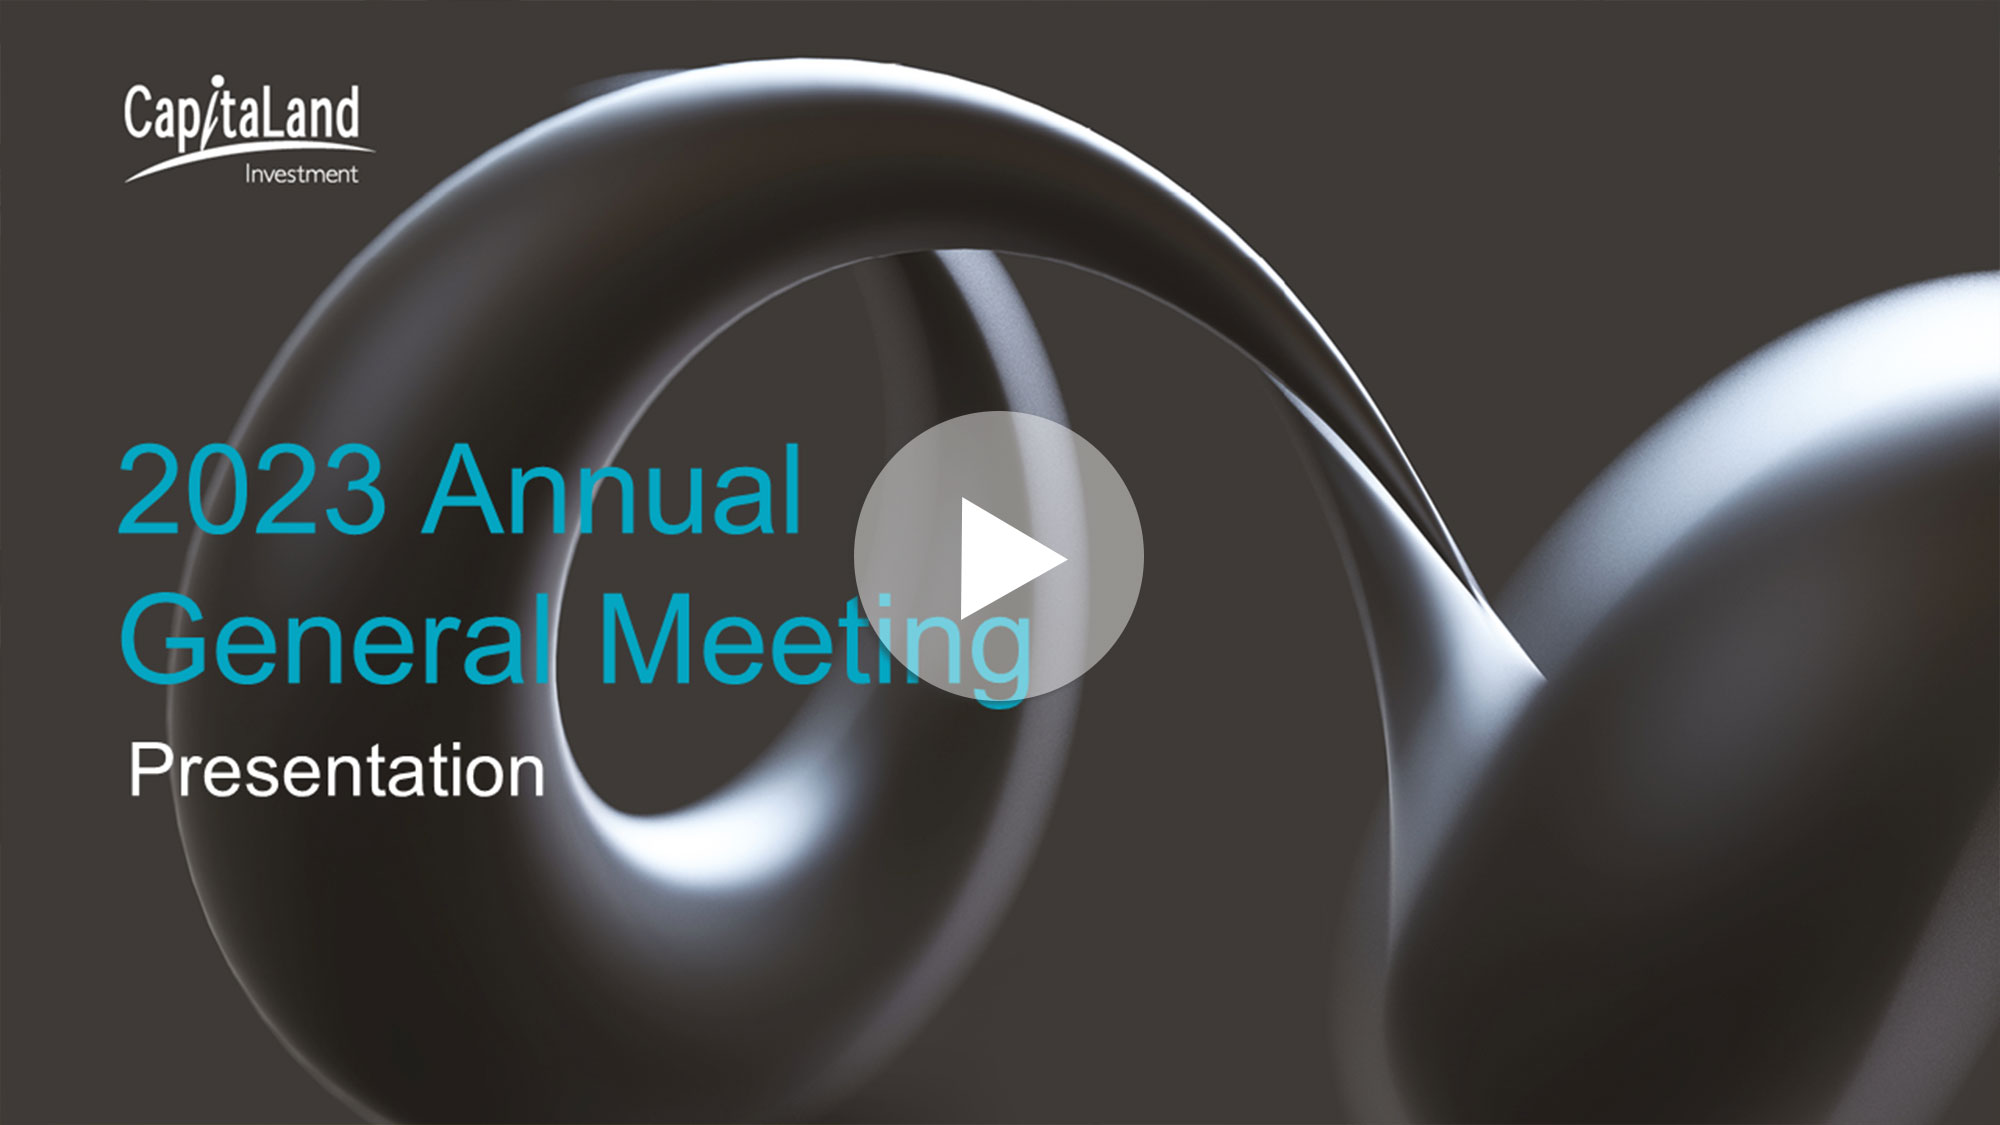 CapitaLand Investment 2023 Annual General Meeting